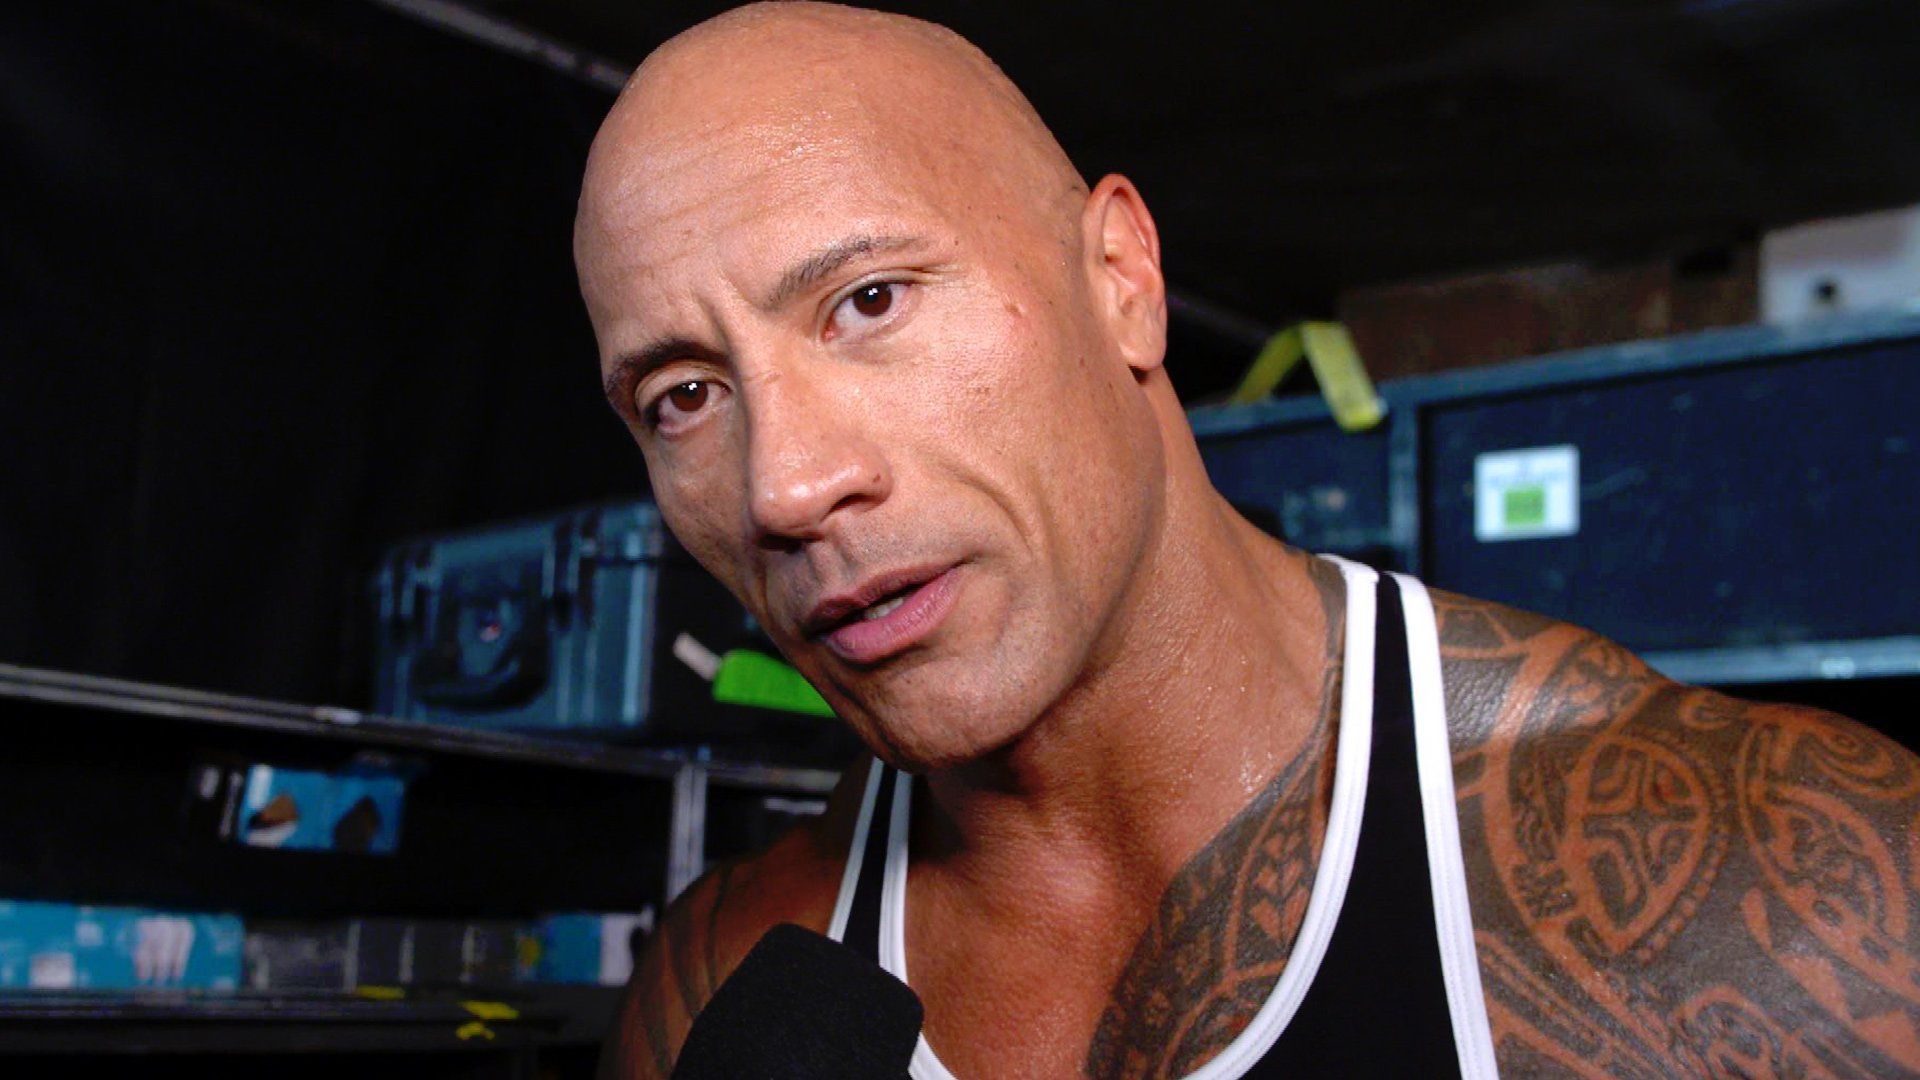 The Rock backstage at a WWE show